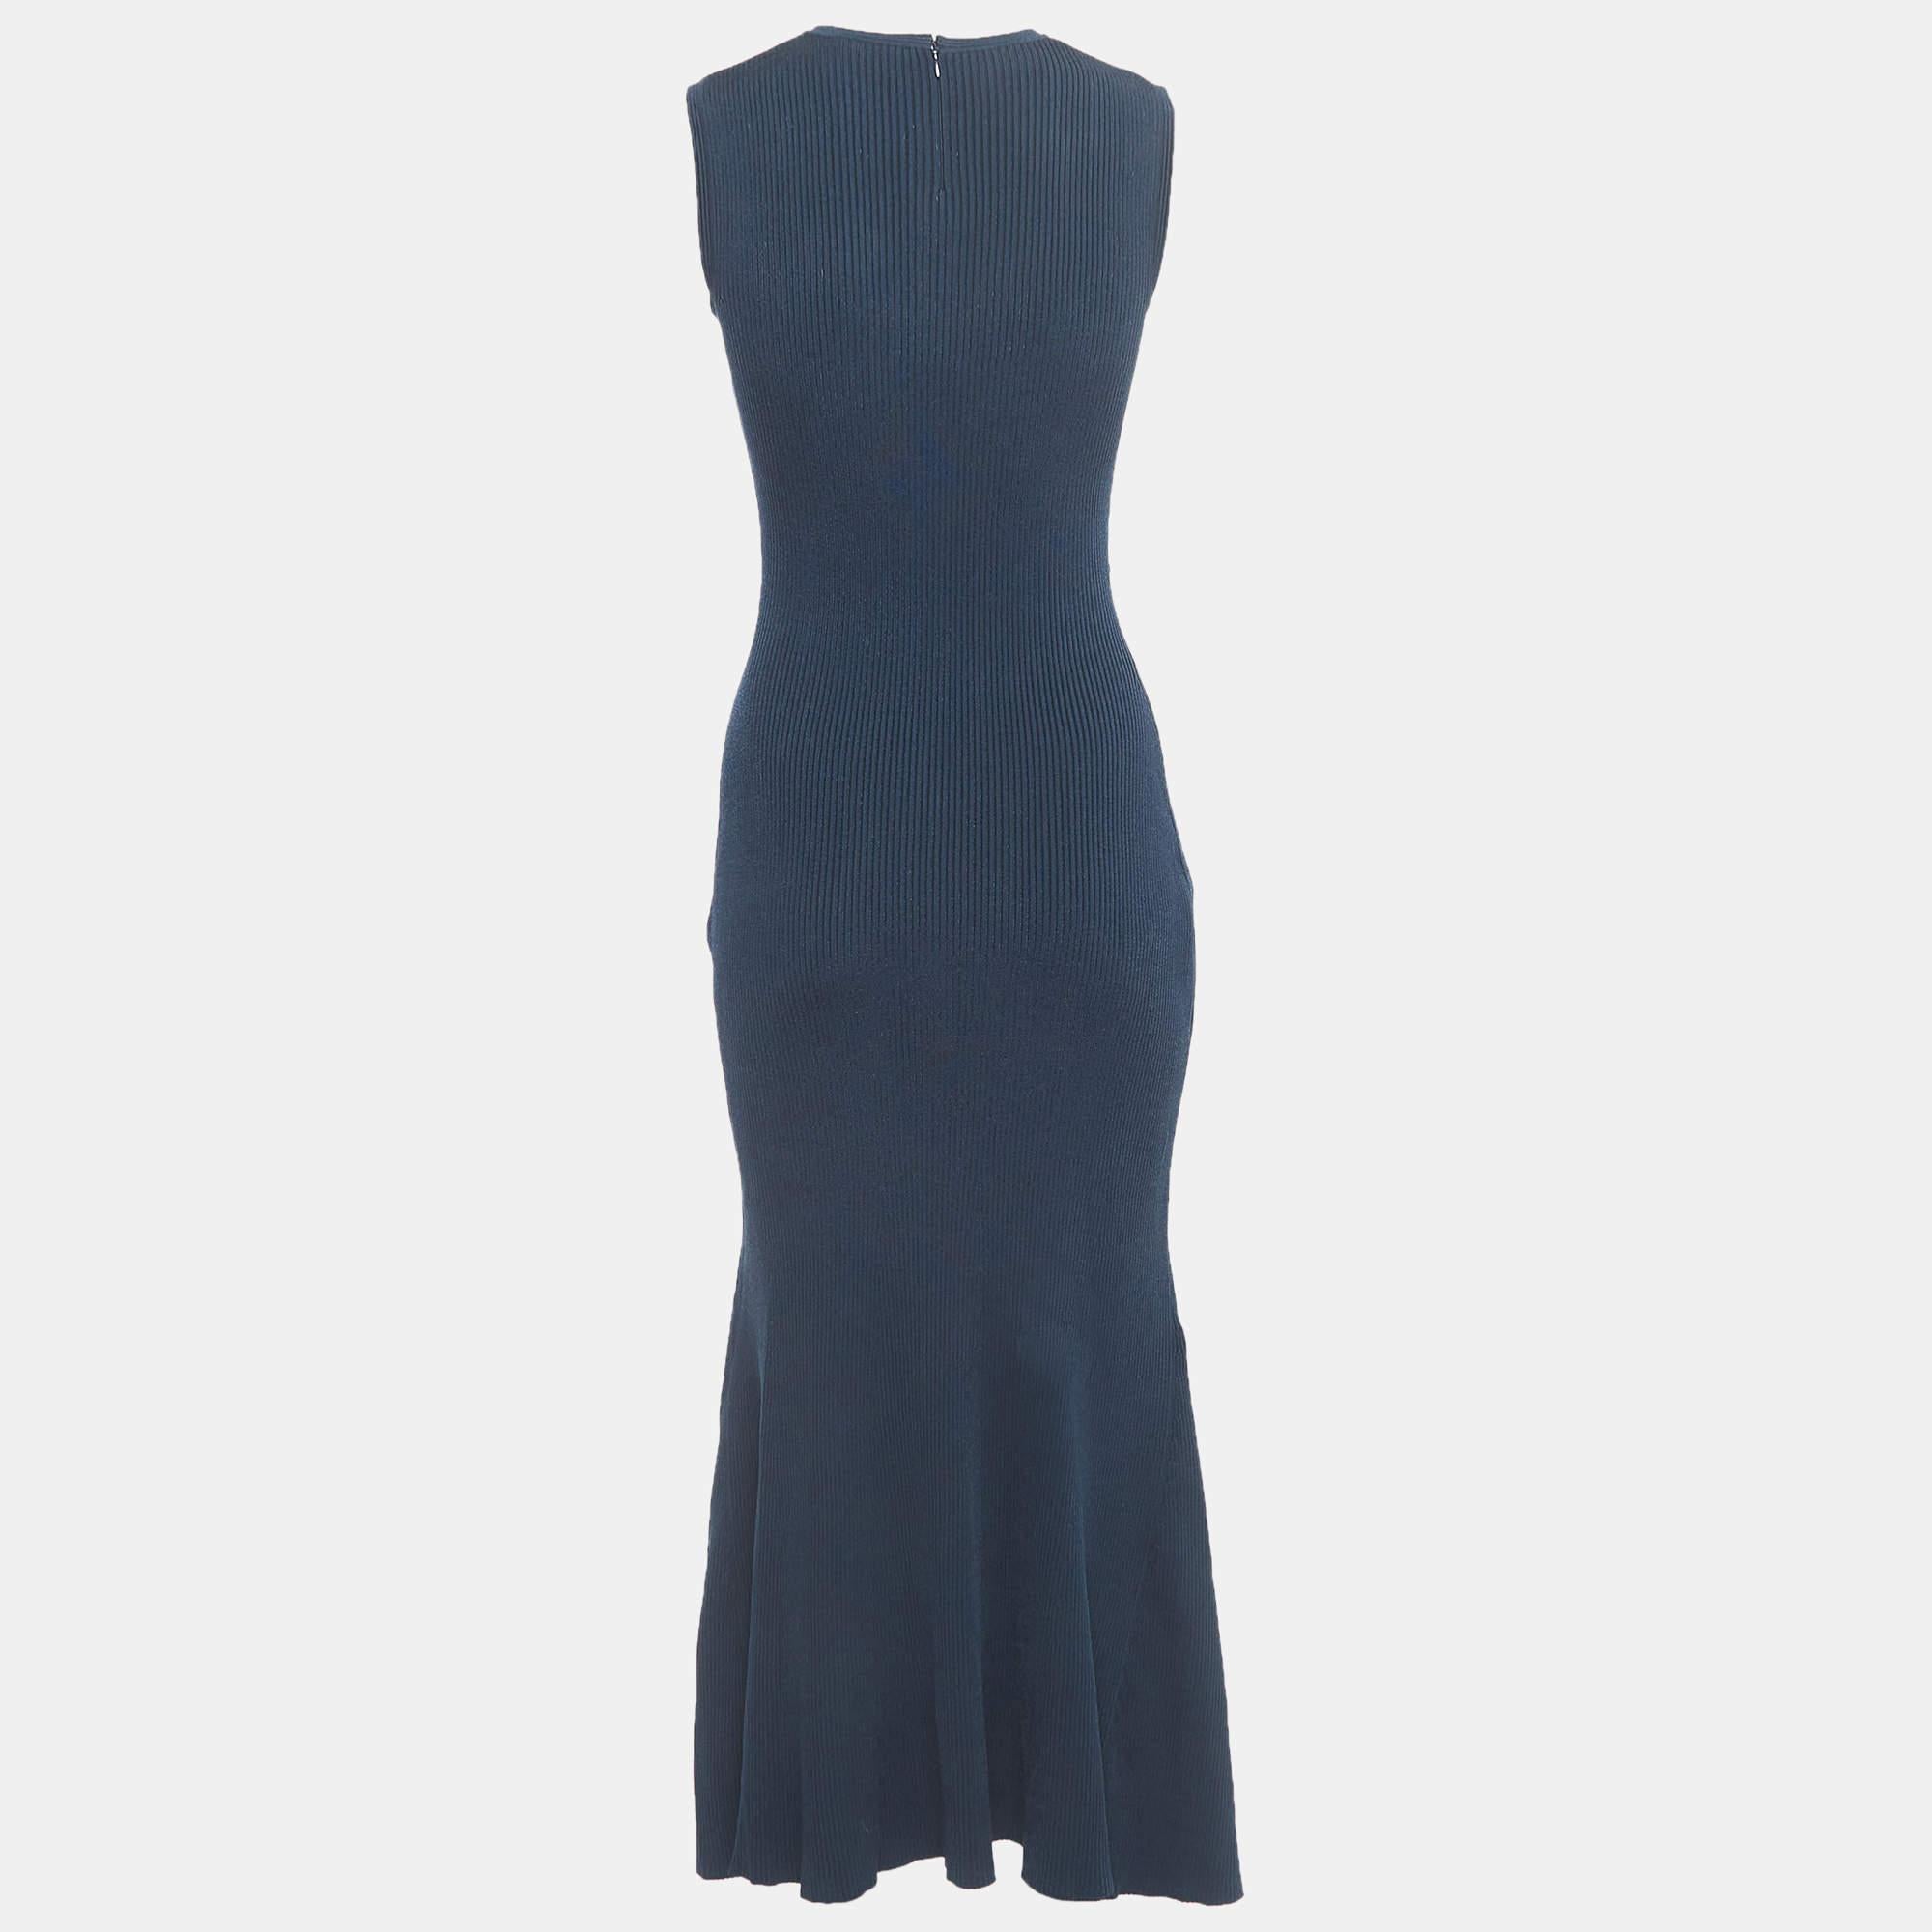 Experience the joy of expert tailoring with this designer dress for women. Meticulously made, it offers a flawless fit and luxe details, ensuring unmatched comfort. Its classic design makes it suitable for any occasion, elevating your style